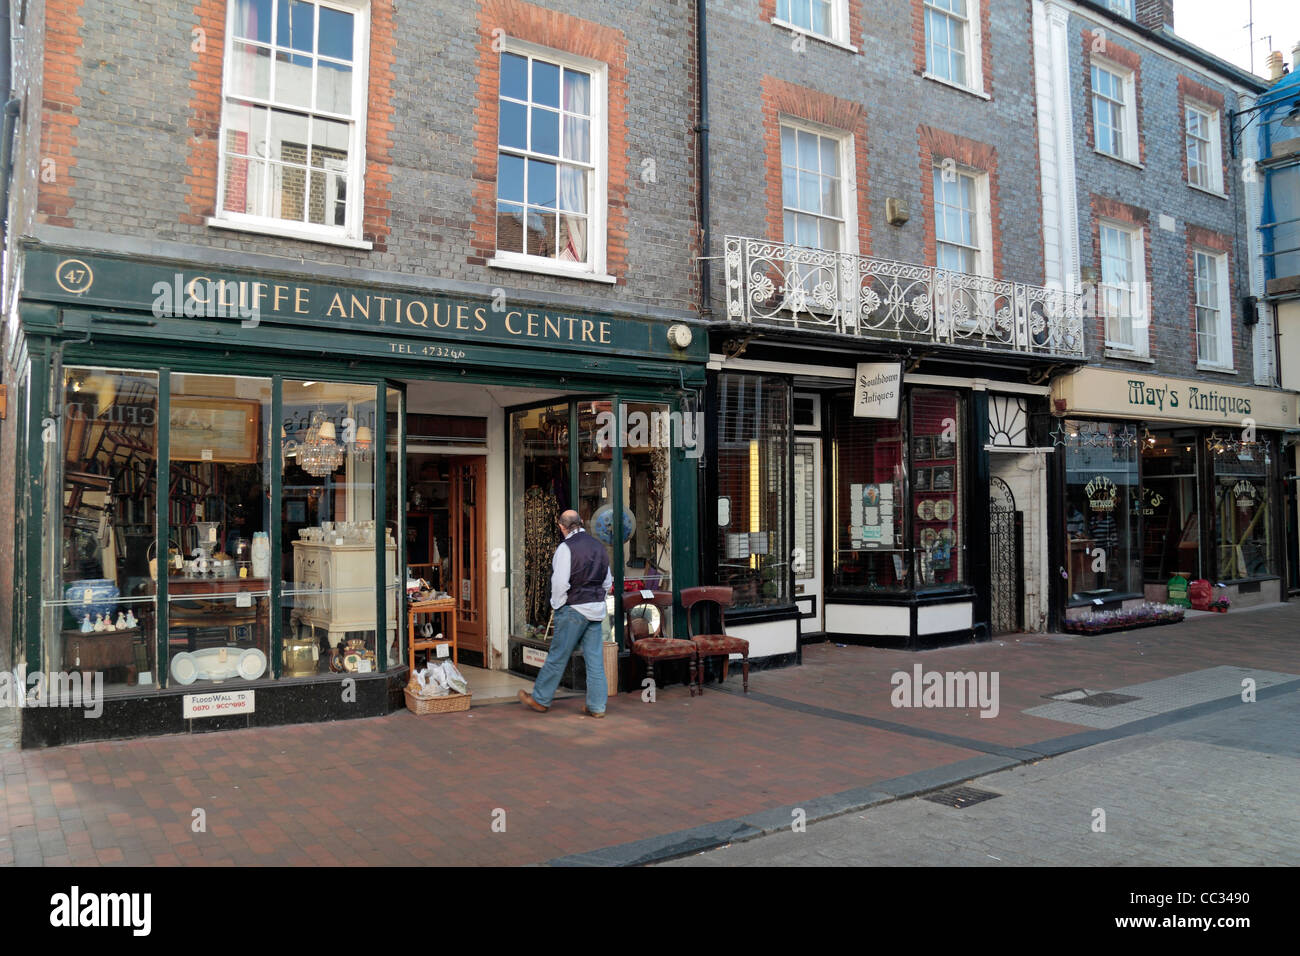 Antique shops (Cliffe Antiques Centre, May's Antiques, Southdown Antiques)  on Cliffe High Street, Lewes, East Sussex, UK. Stock Photo